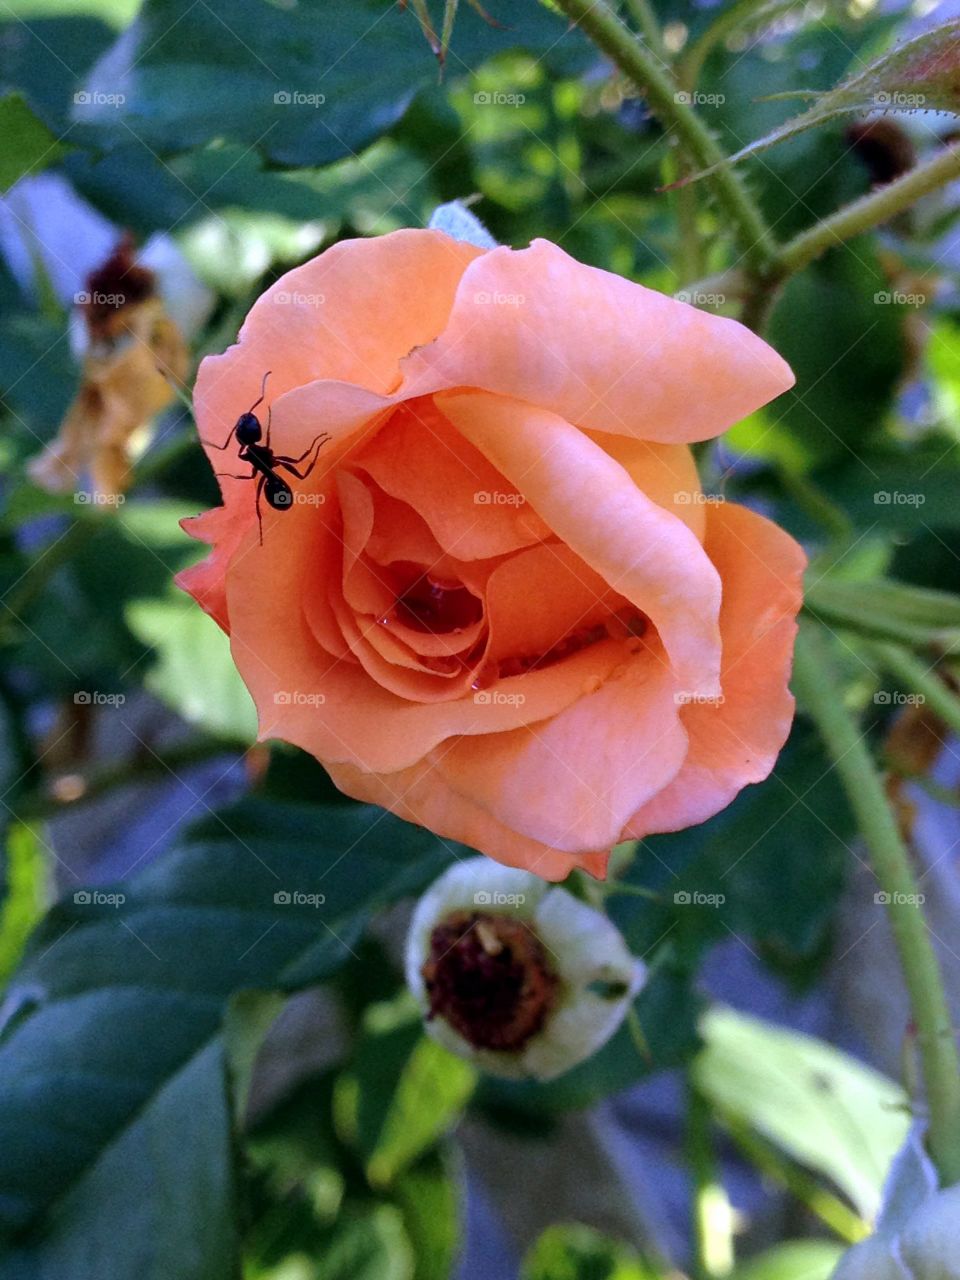 Peach colored flowering rose bush in full bloom with an ant on a petal. These climb on trellises & grow vertically.